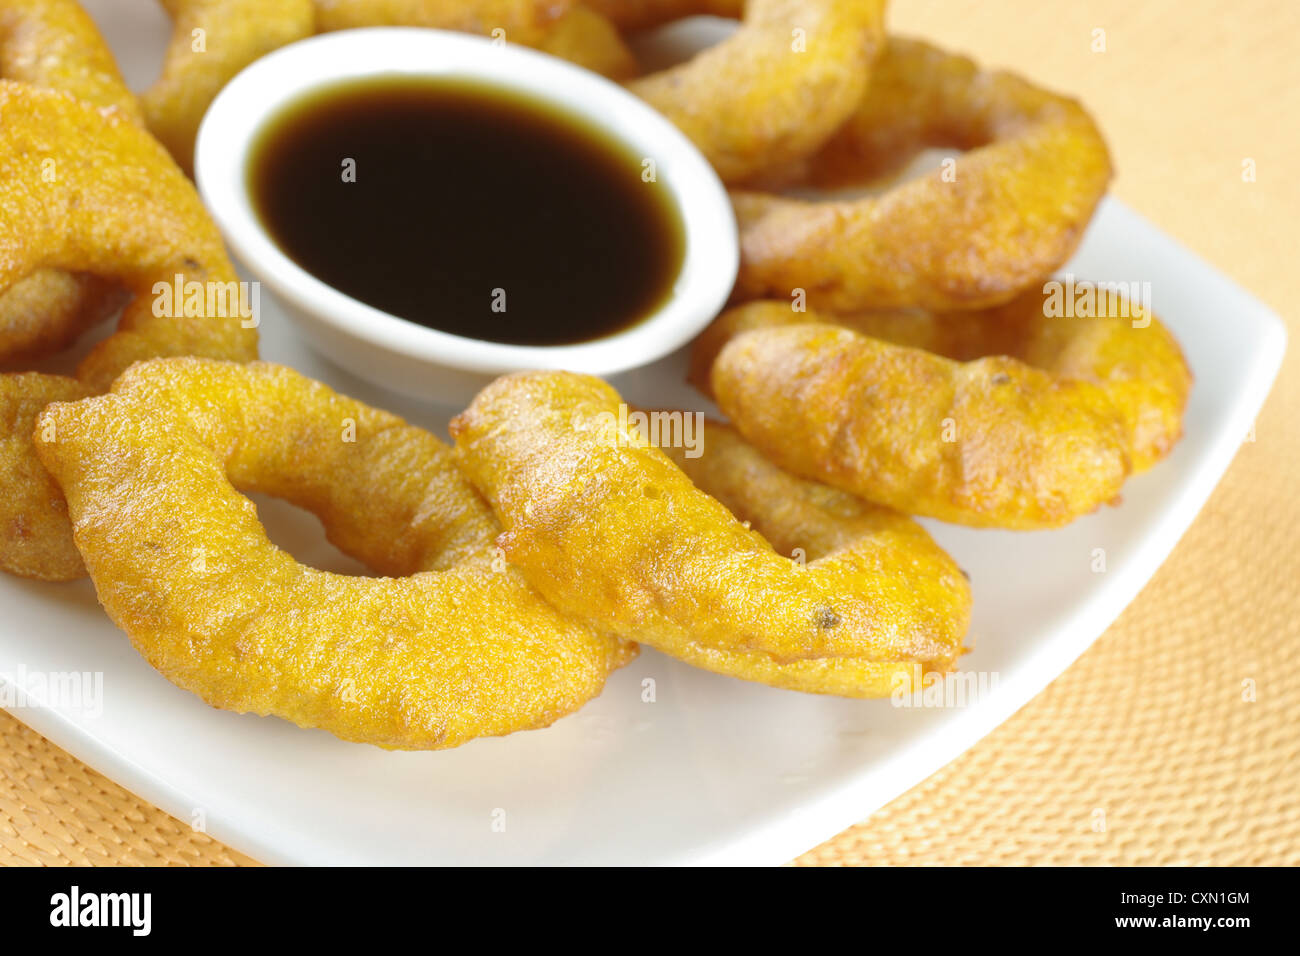 Popular Peruvian dessert called Picarones made from squash and sweet potato and served with Chancaca syrup (kind of honey) Stock Photo